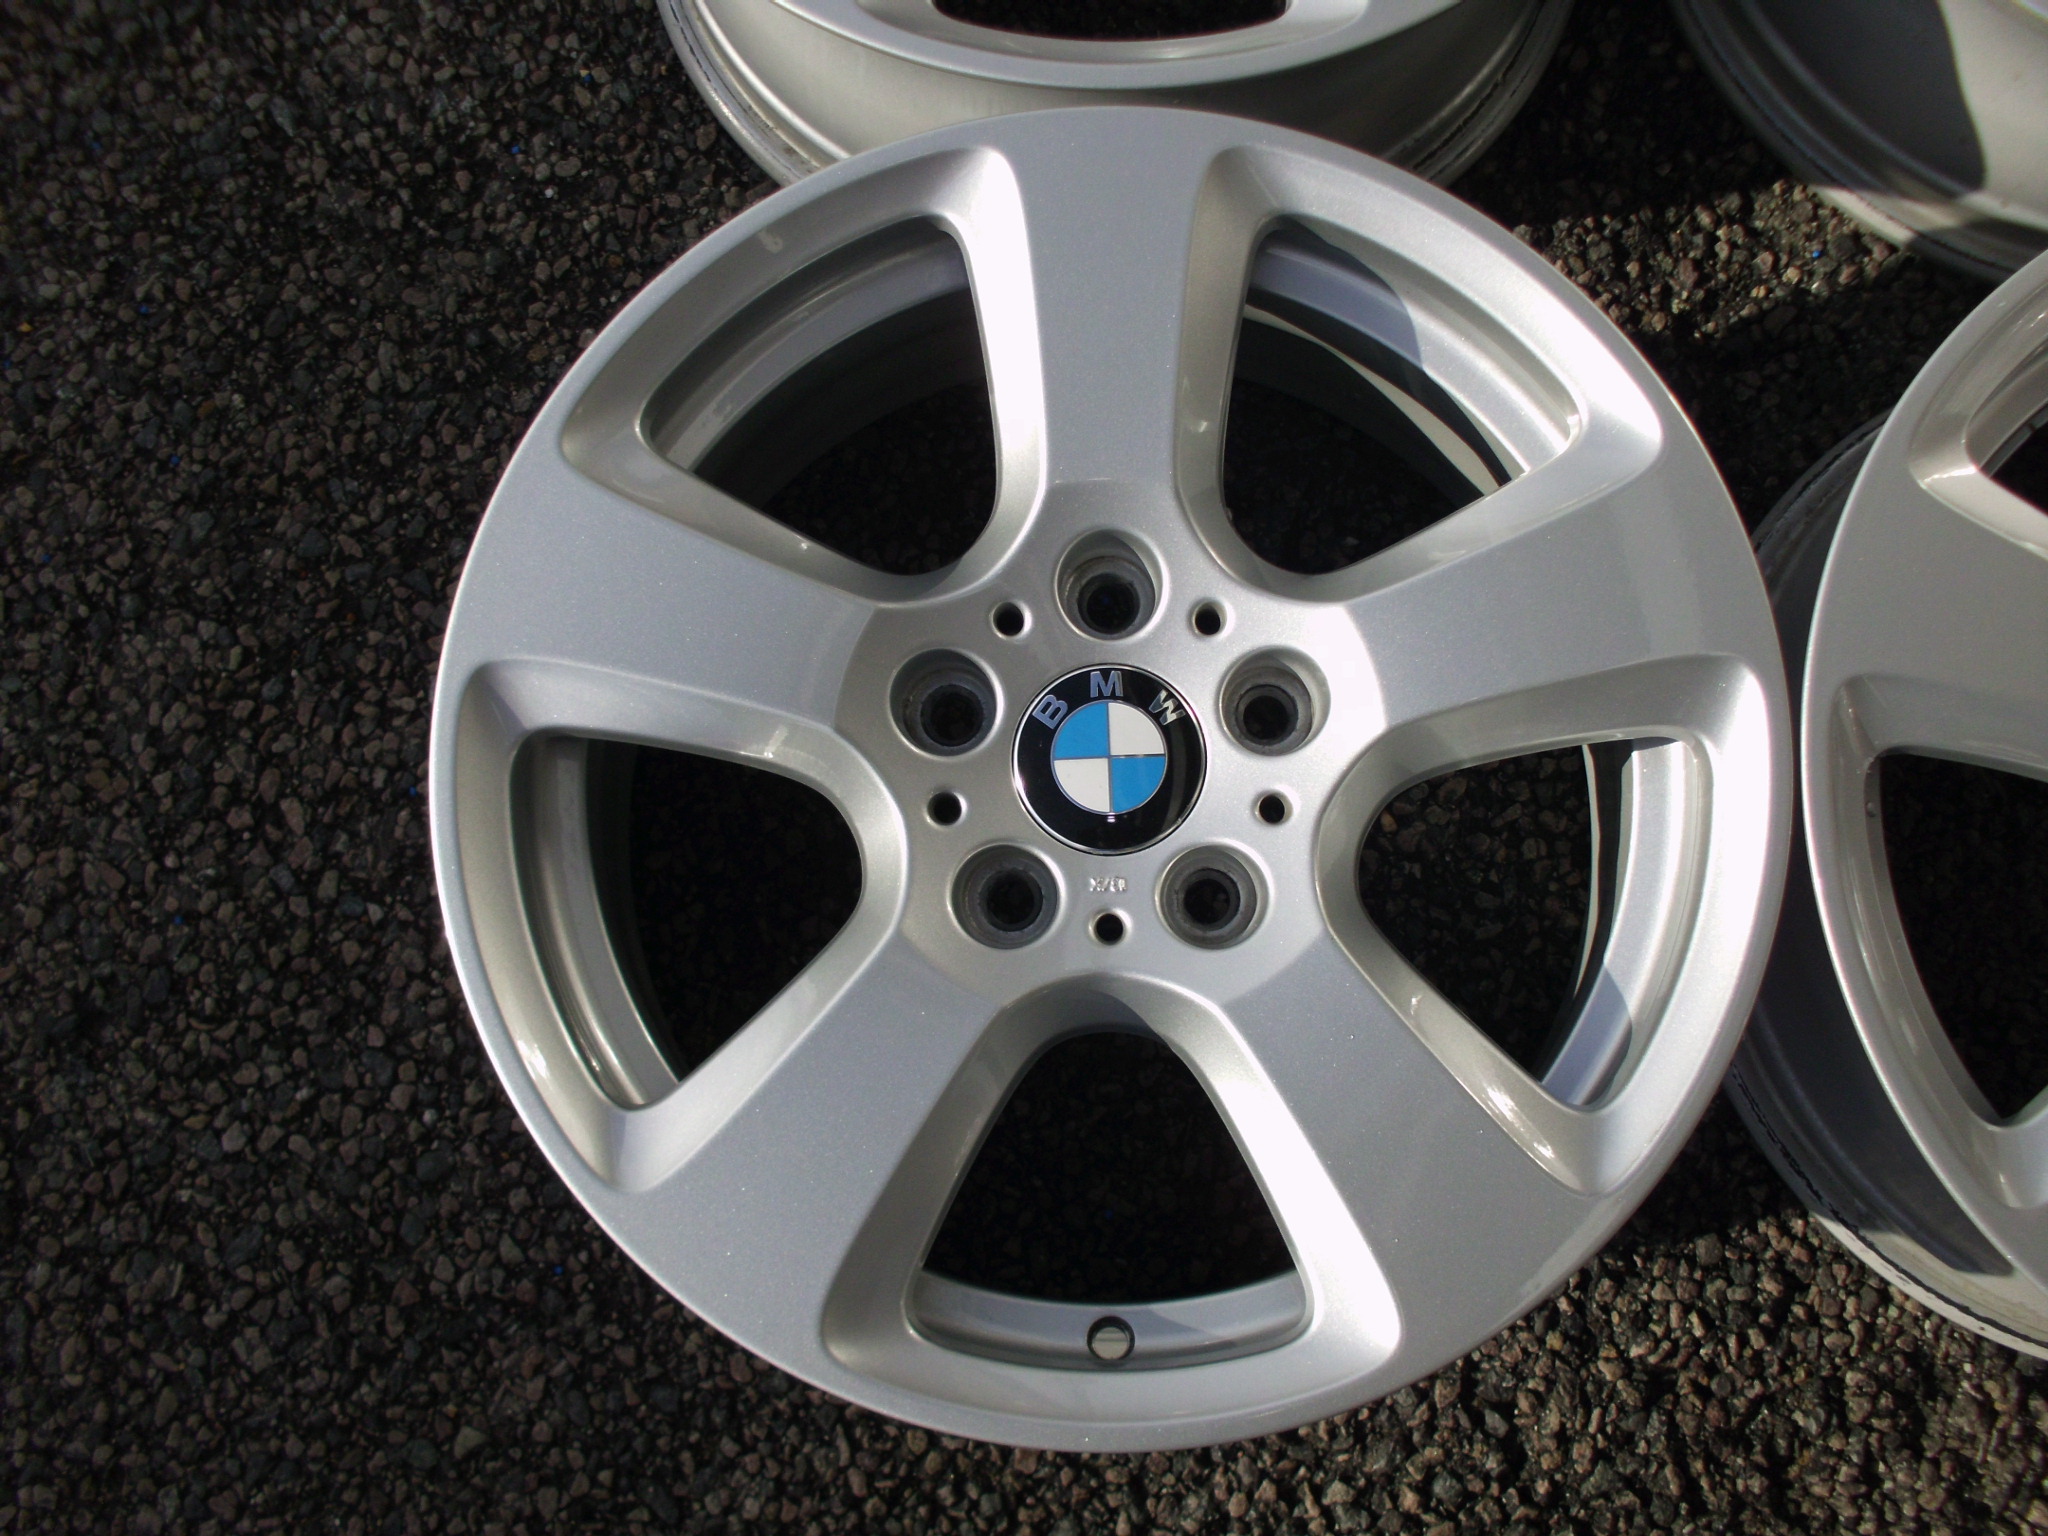 USED 17" GENUINE BMW STYLE 243 5 SPOKE ALLOY WHEELS, EXCELLENT UNMARKED CONDITION